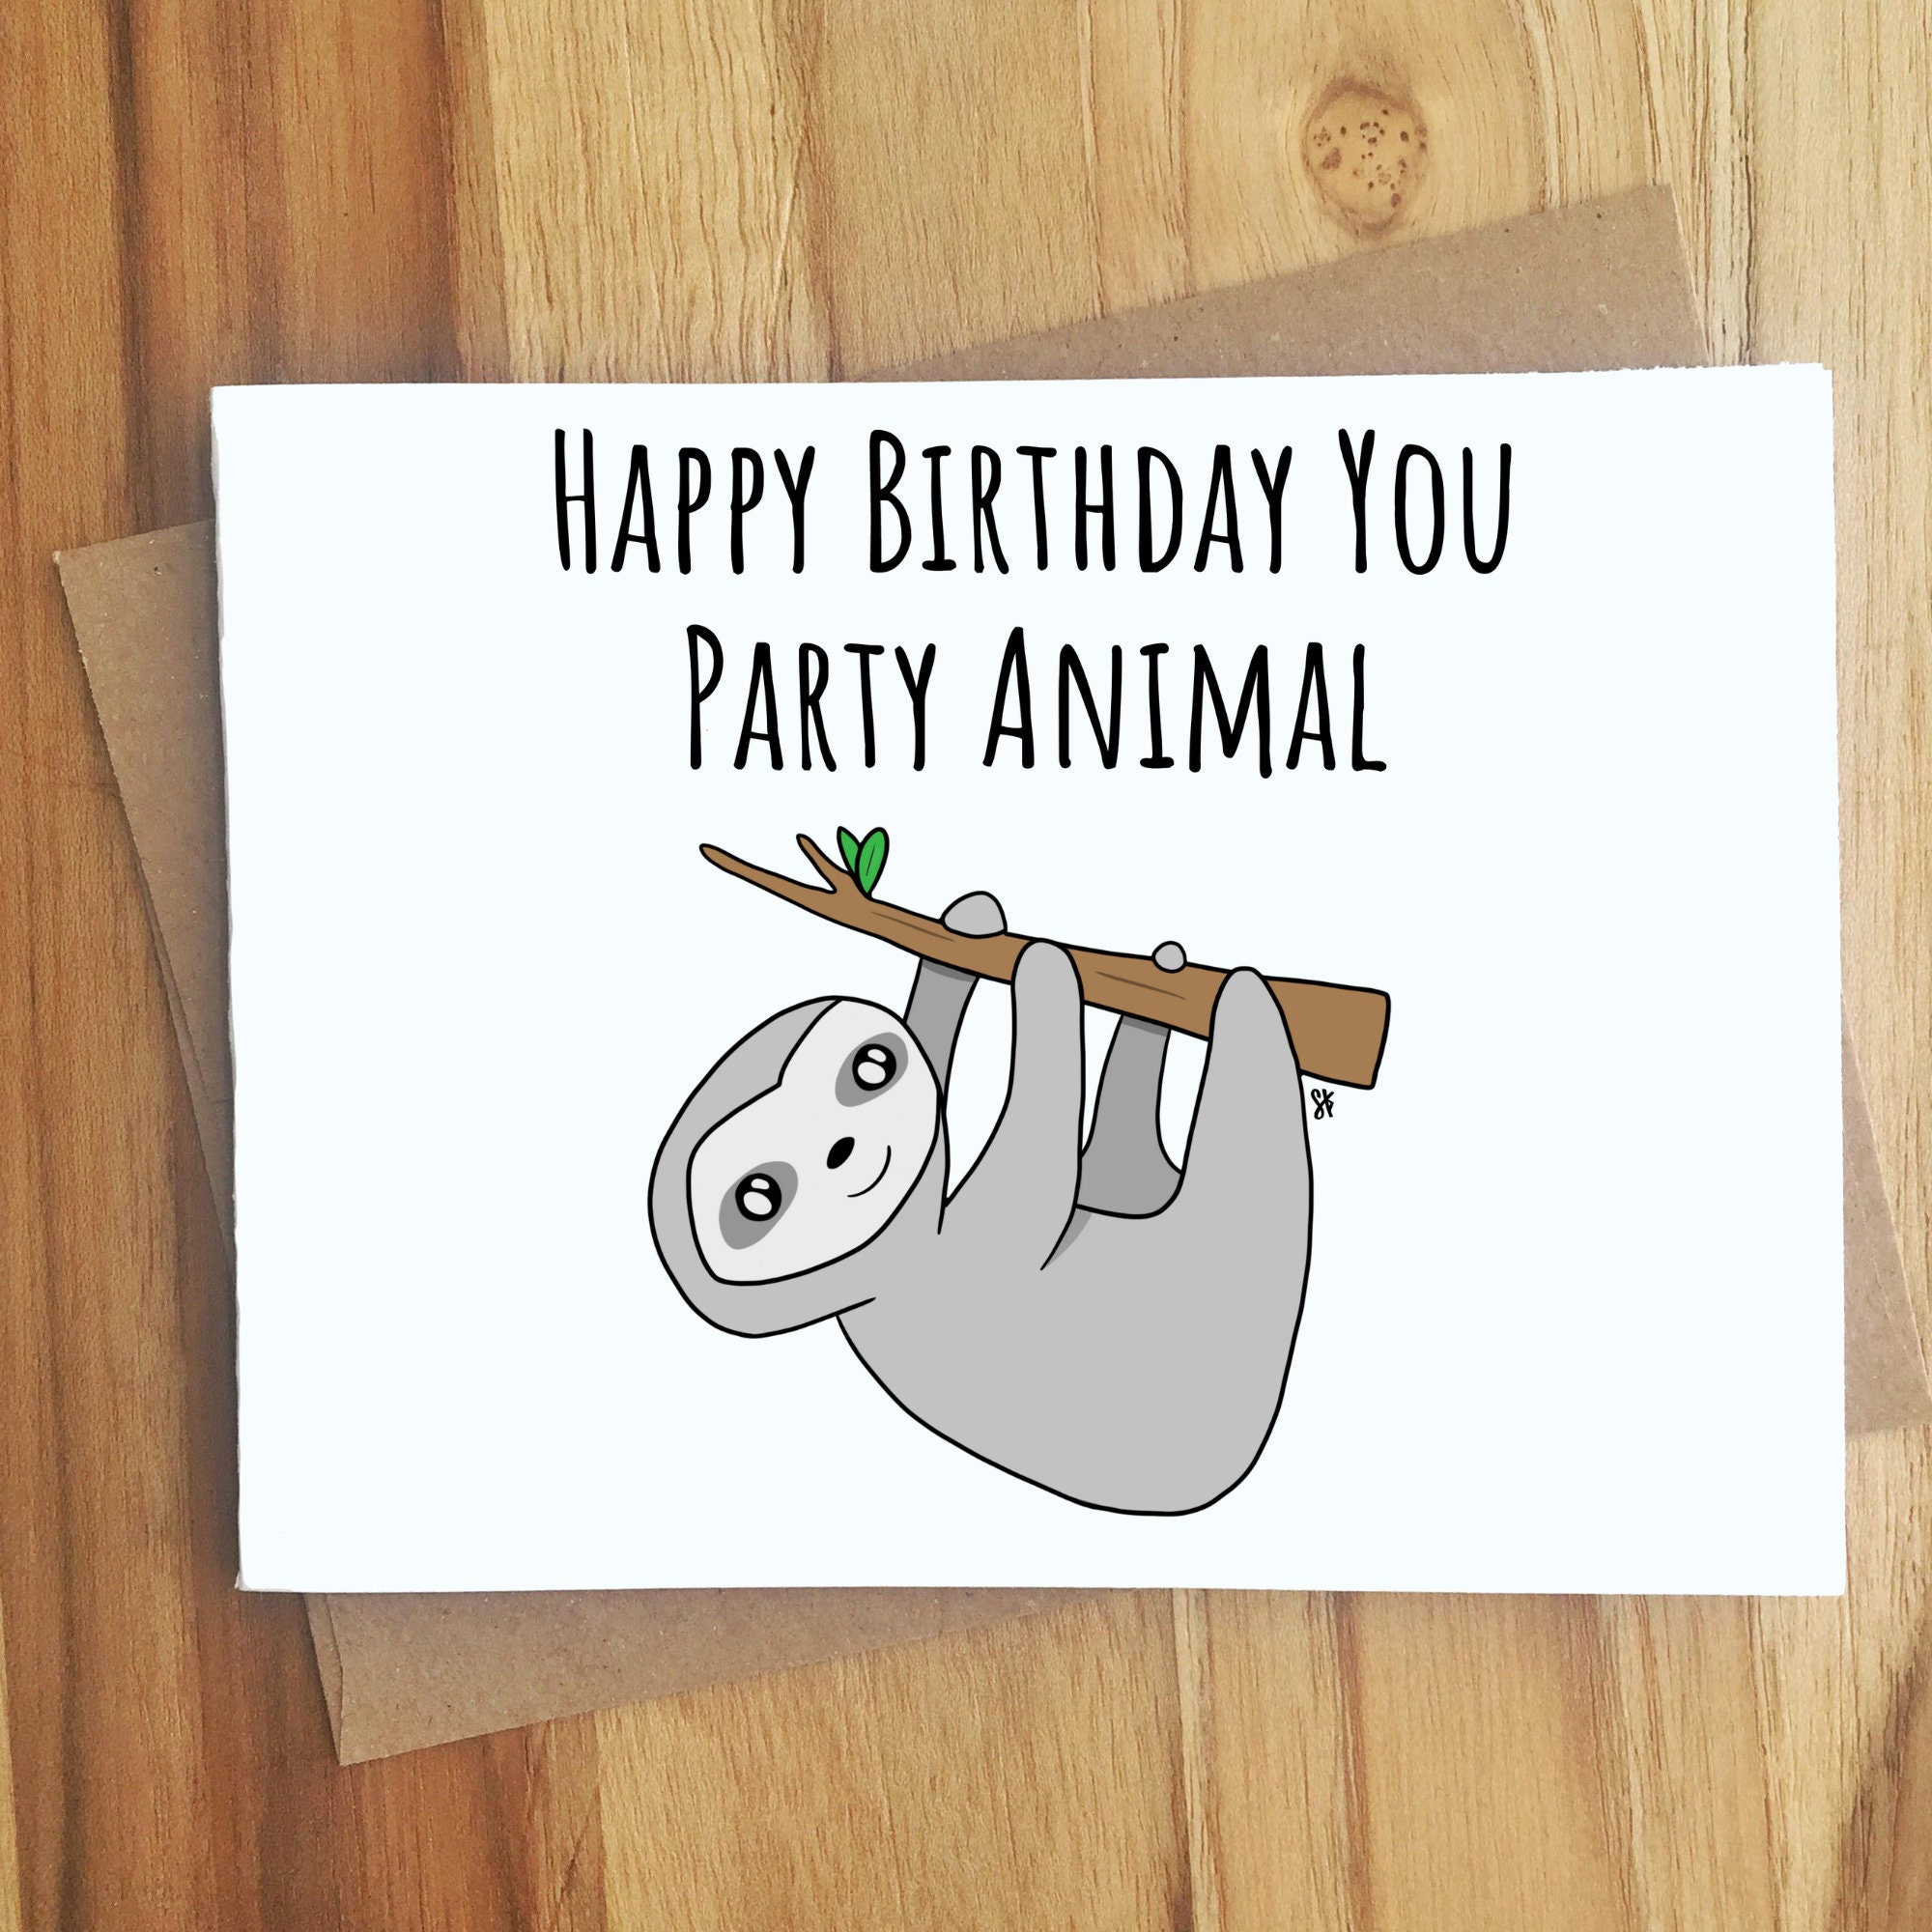 Happy Birthday You Party Animal Sloth Pun Greeting Card / Handmade Birthday  Gift / Funny Card / Animal Puns Punny / Play on Words / Party -  Denmark